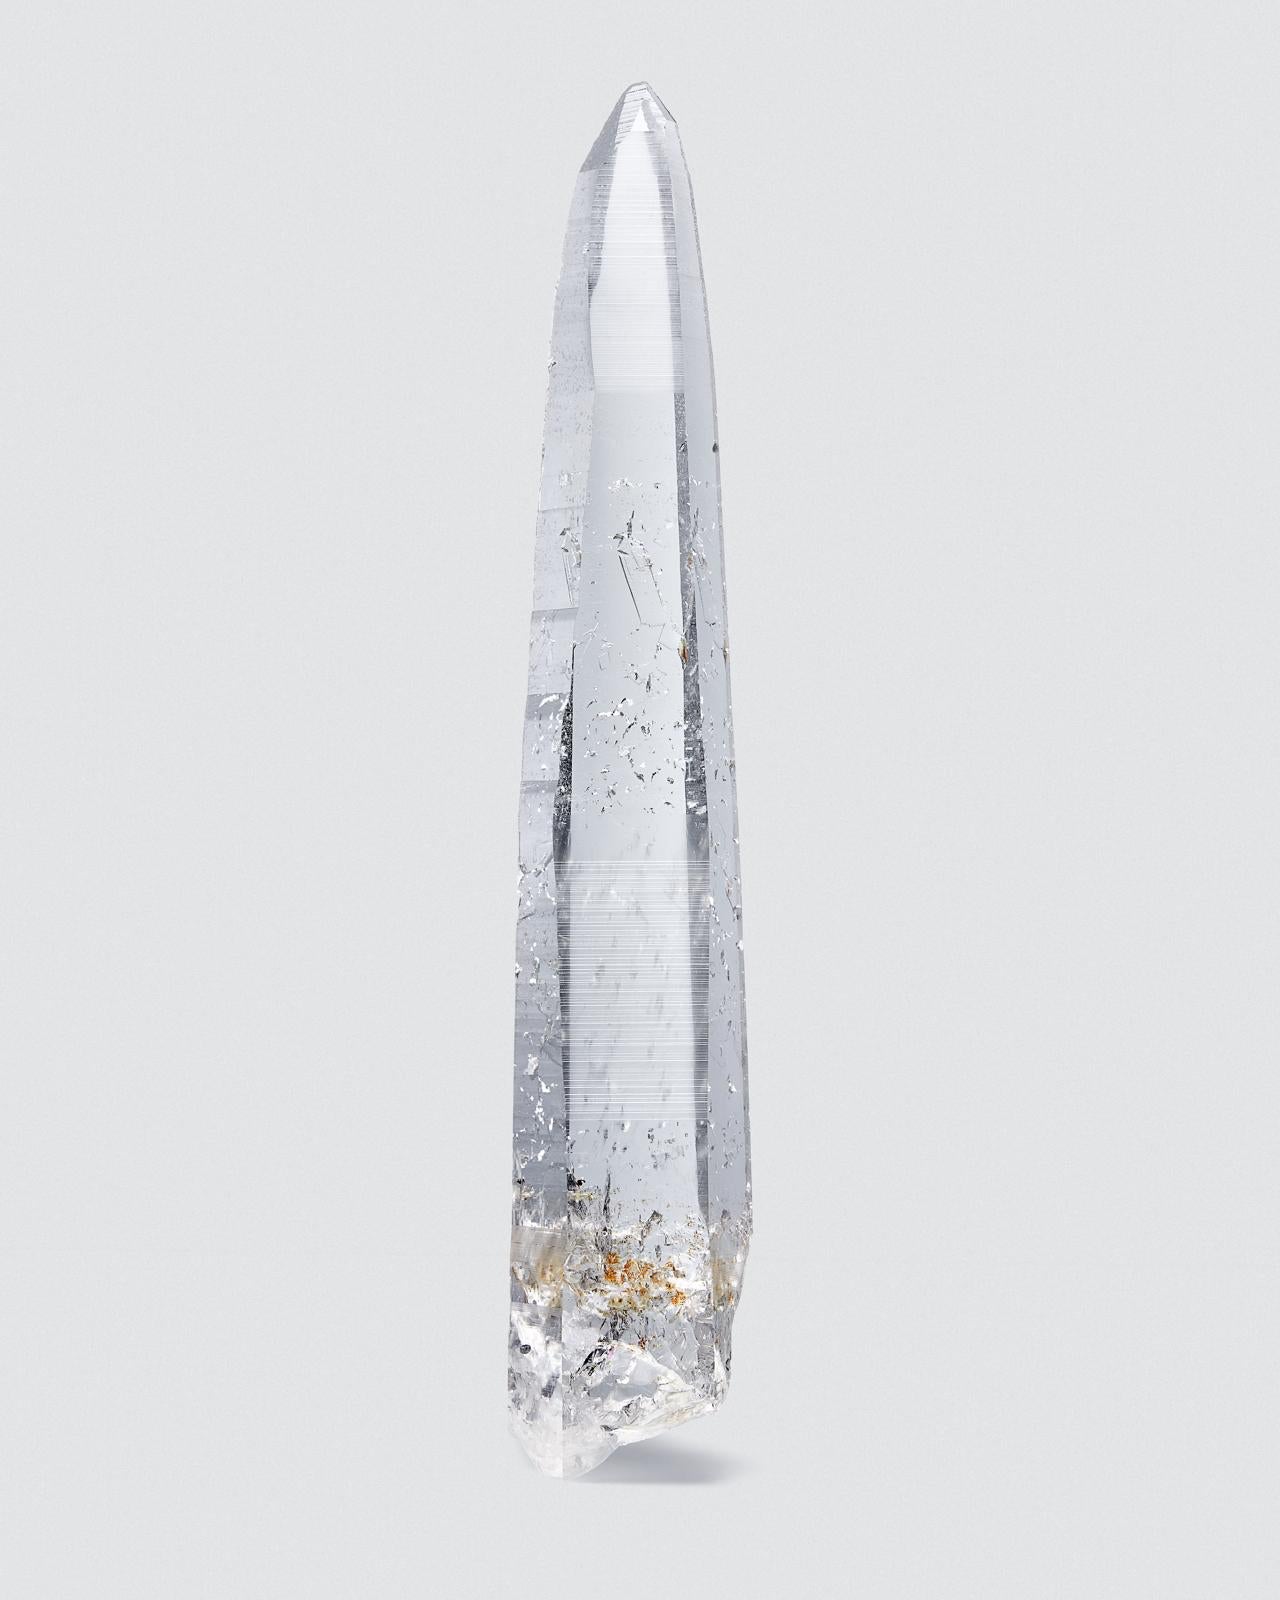 Quartz.

Penas blancas mine, Vasquez-Yacopi dist.,
Boyaca Dept., Colombia.

Measures: 45 cm tall x 7.6 cm wide.

At least 12% of the earth's crust is quartz, making it one of the most common minerals. Quartz has played many roles throughout